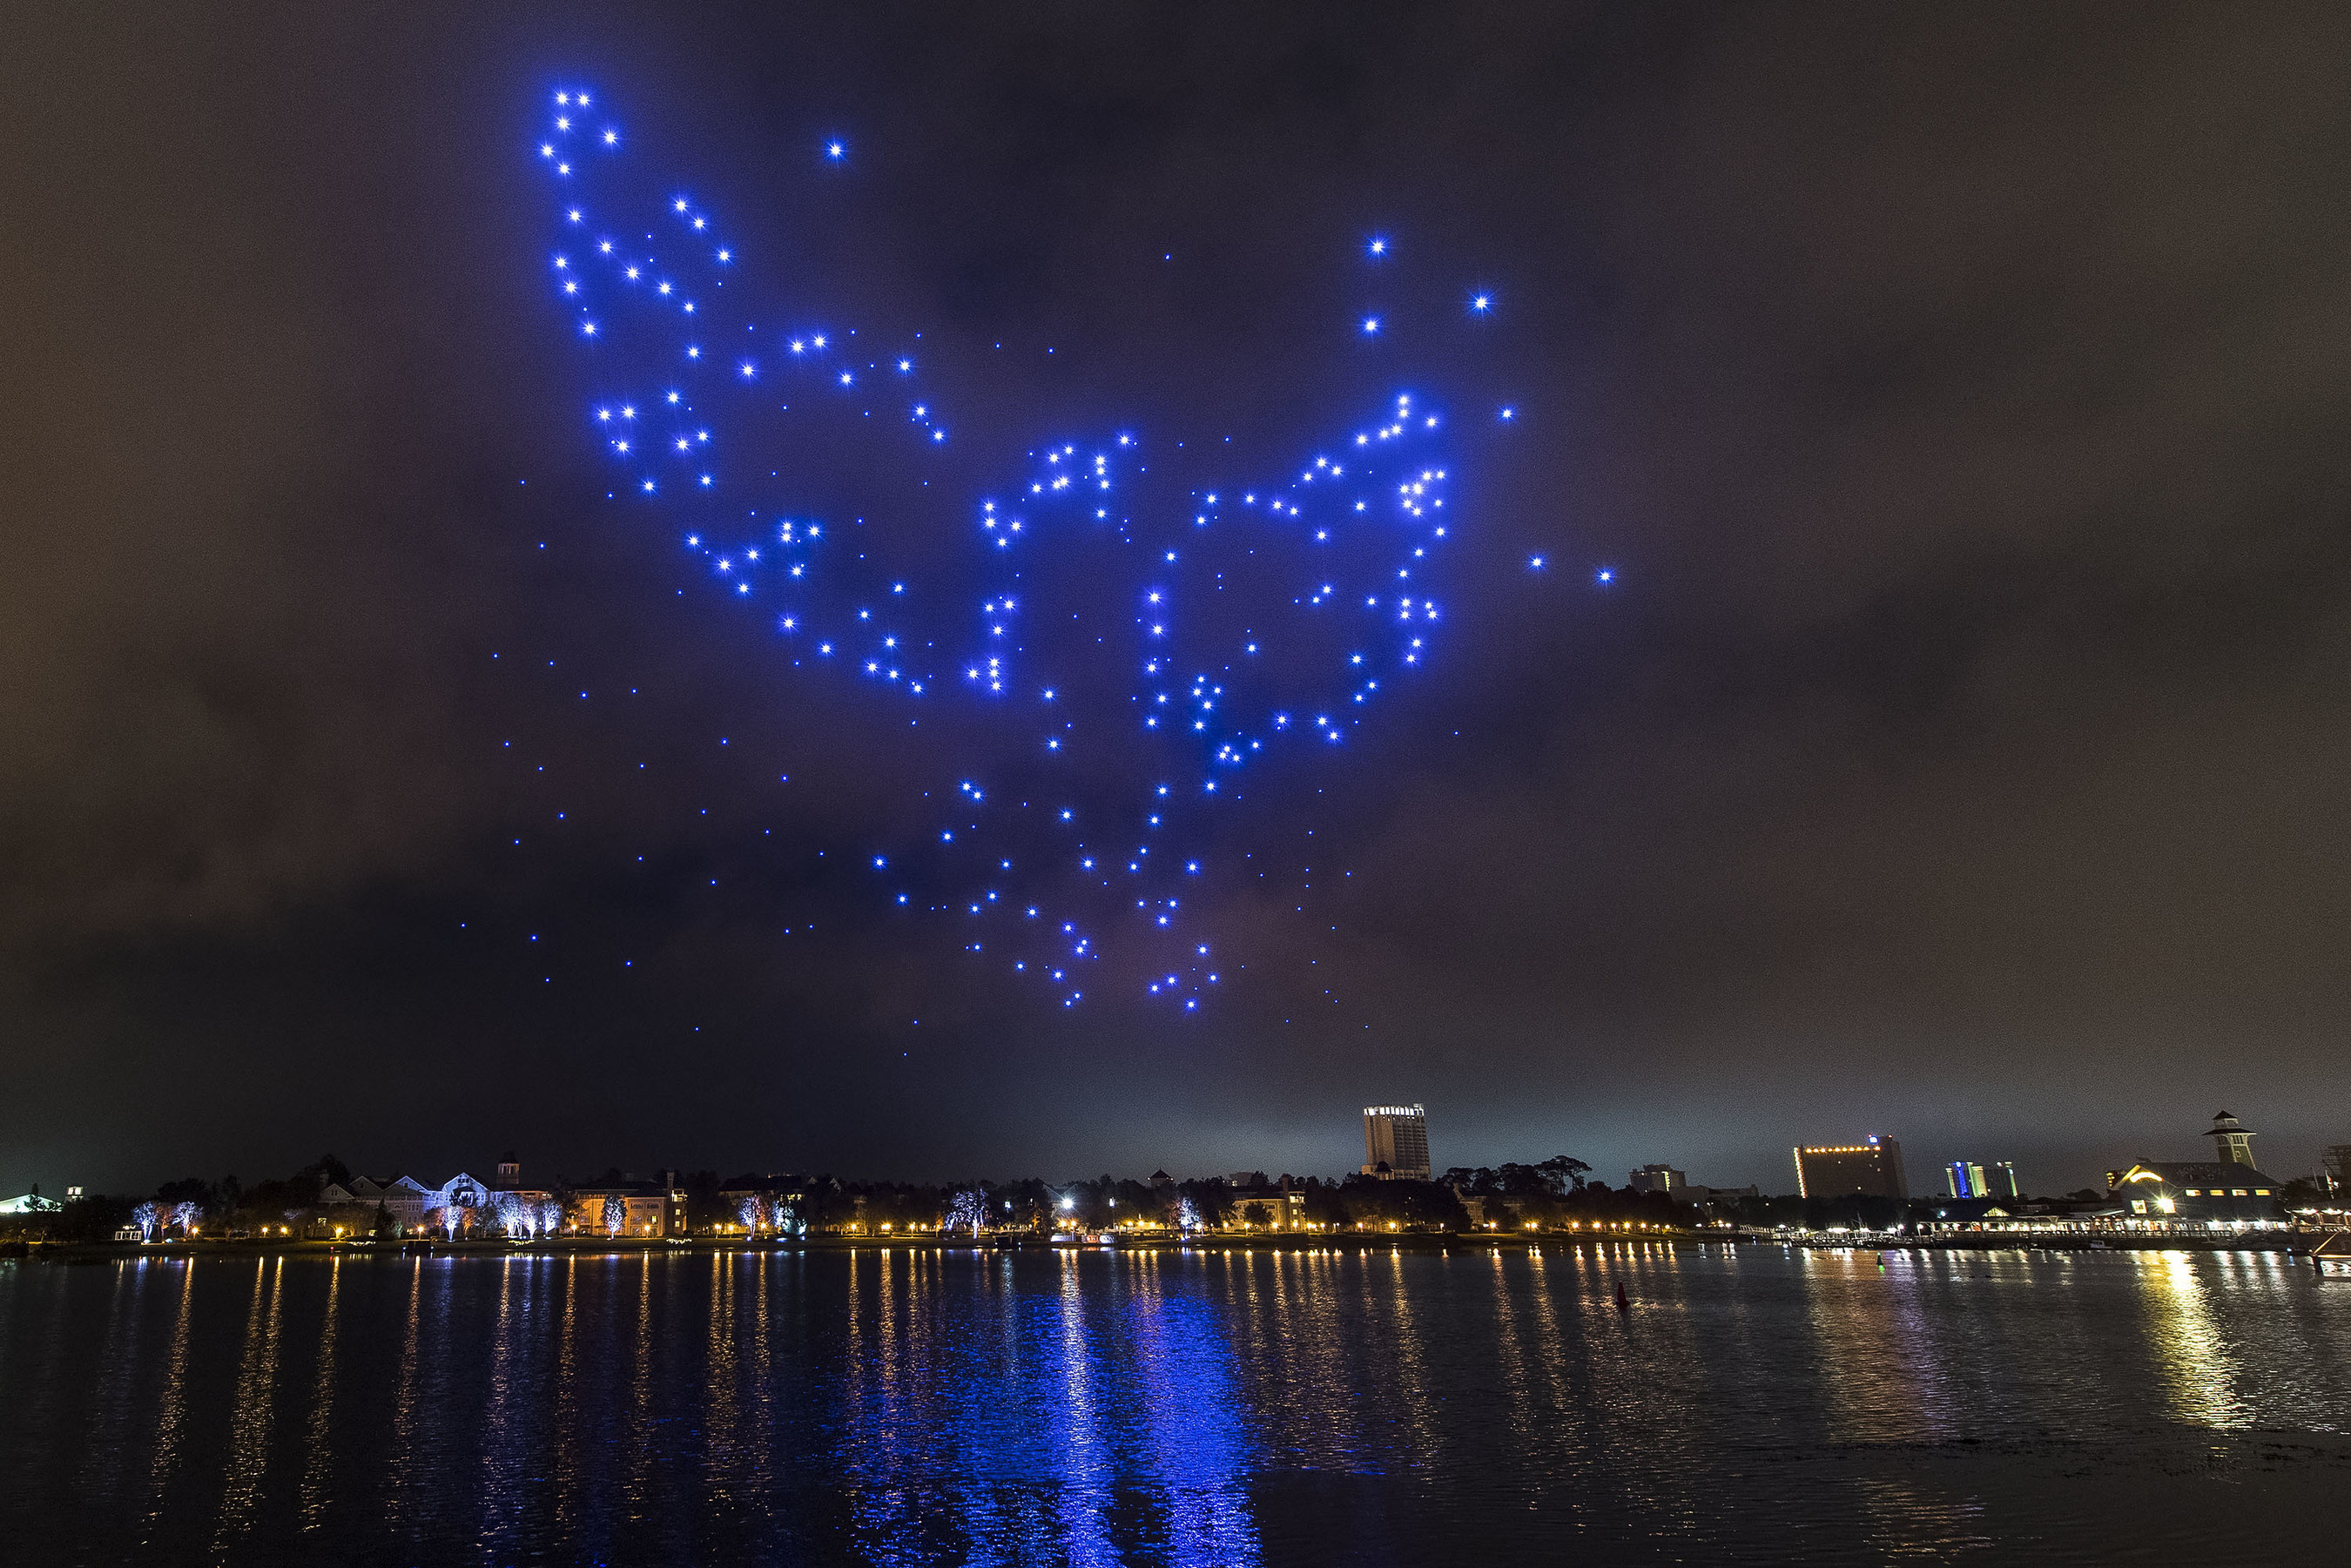 Starbright Holidays - An Intel Collaboration at Disney Spring: This holiday season, guests at Disney Springs-the shopping, dining and entertainment district of Walt Disney World Resort-will get a chance to see Disney and Intel exploring remarkable new technology as hundreds of lighted show drones take to the nighttime sky in "Starbright Holidays - An Intel Collaboration." (Matt Stroshane, photographer)